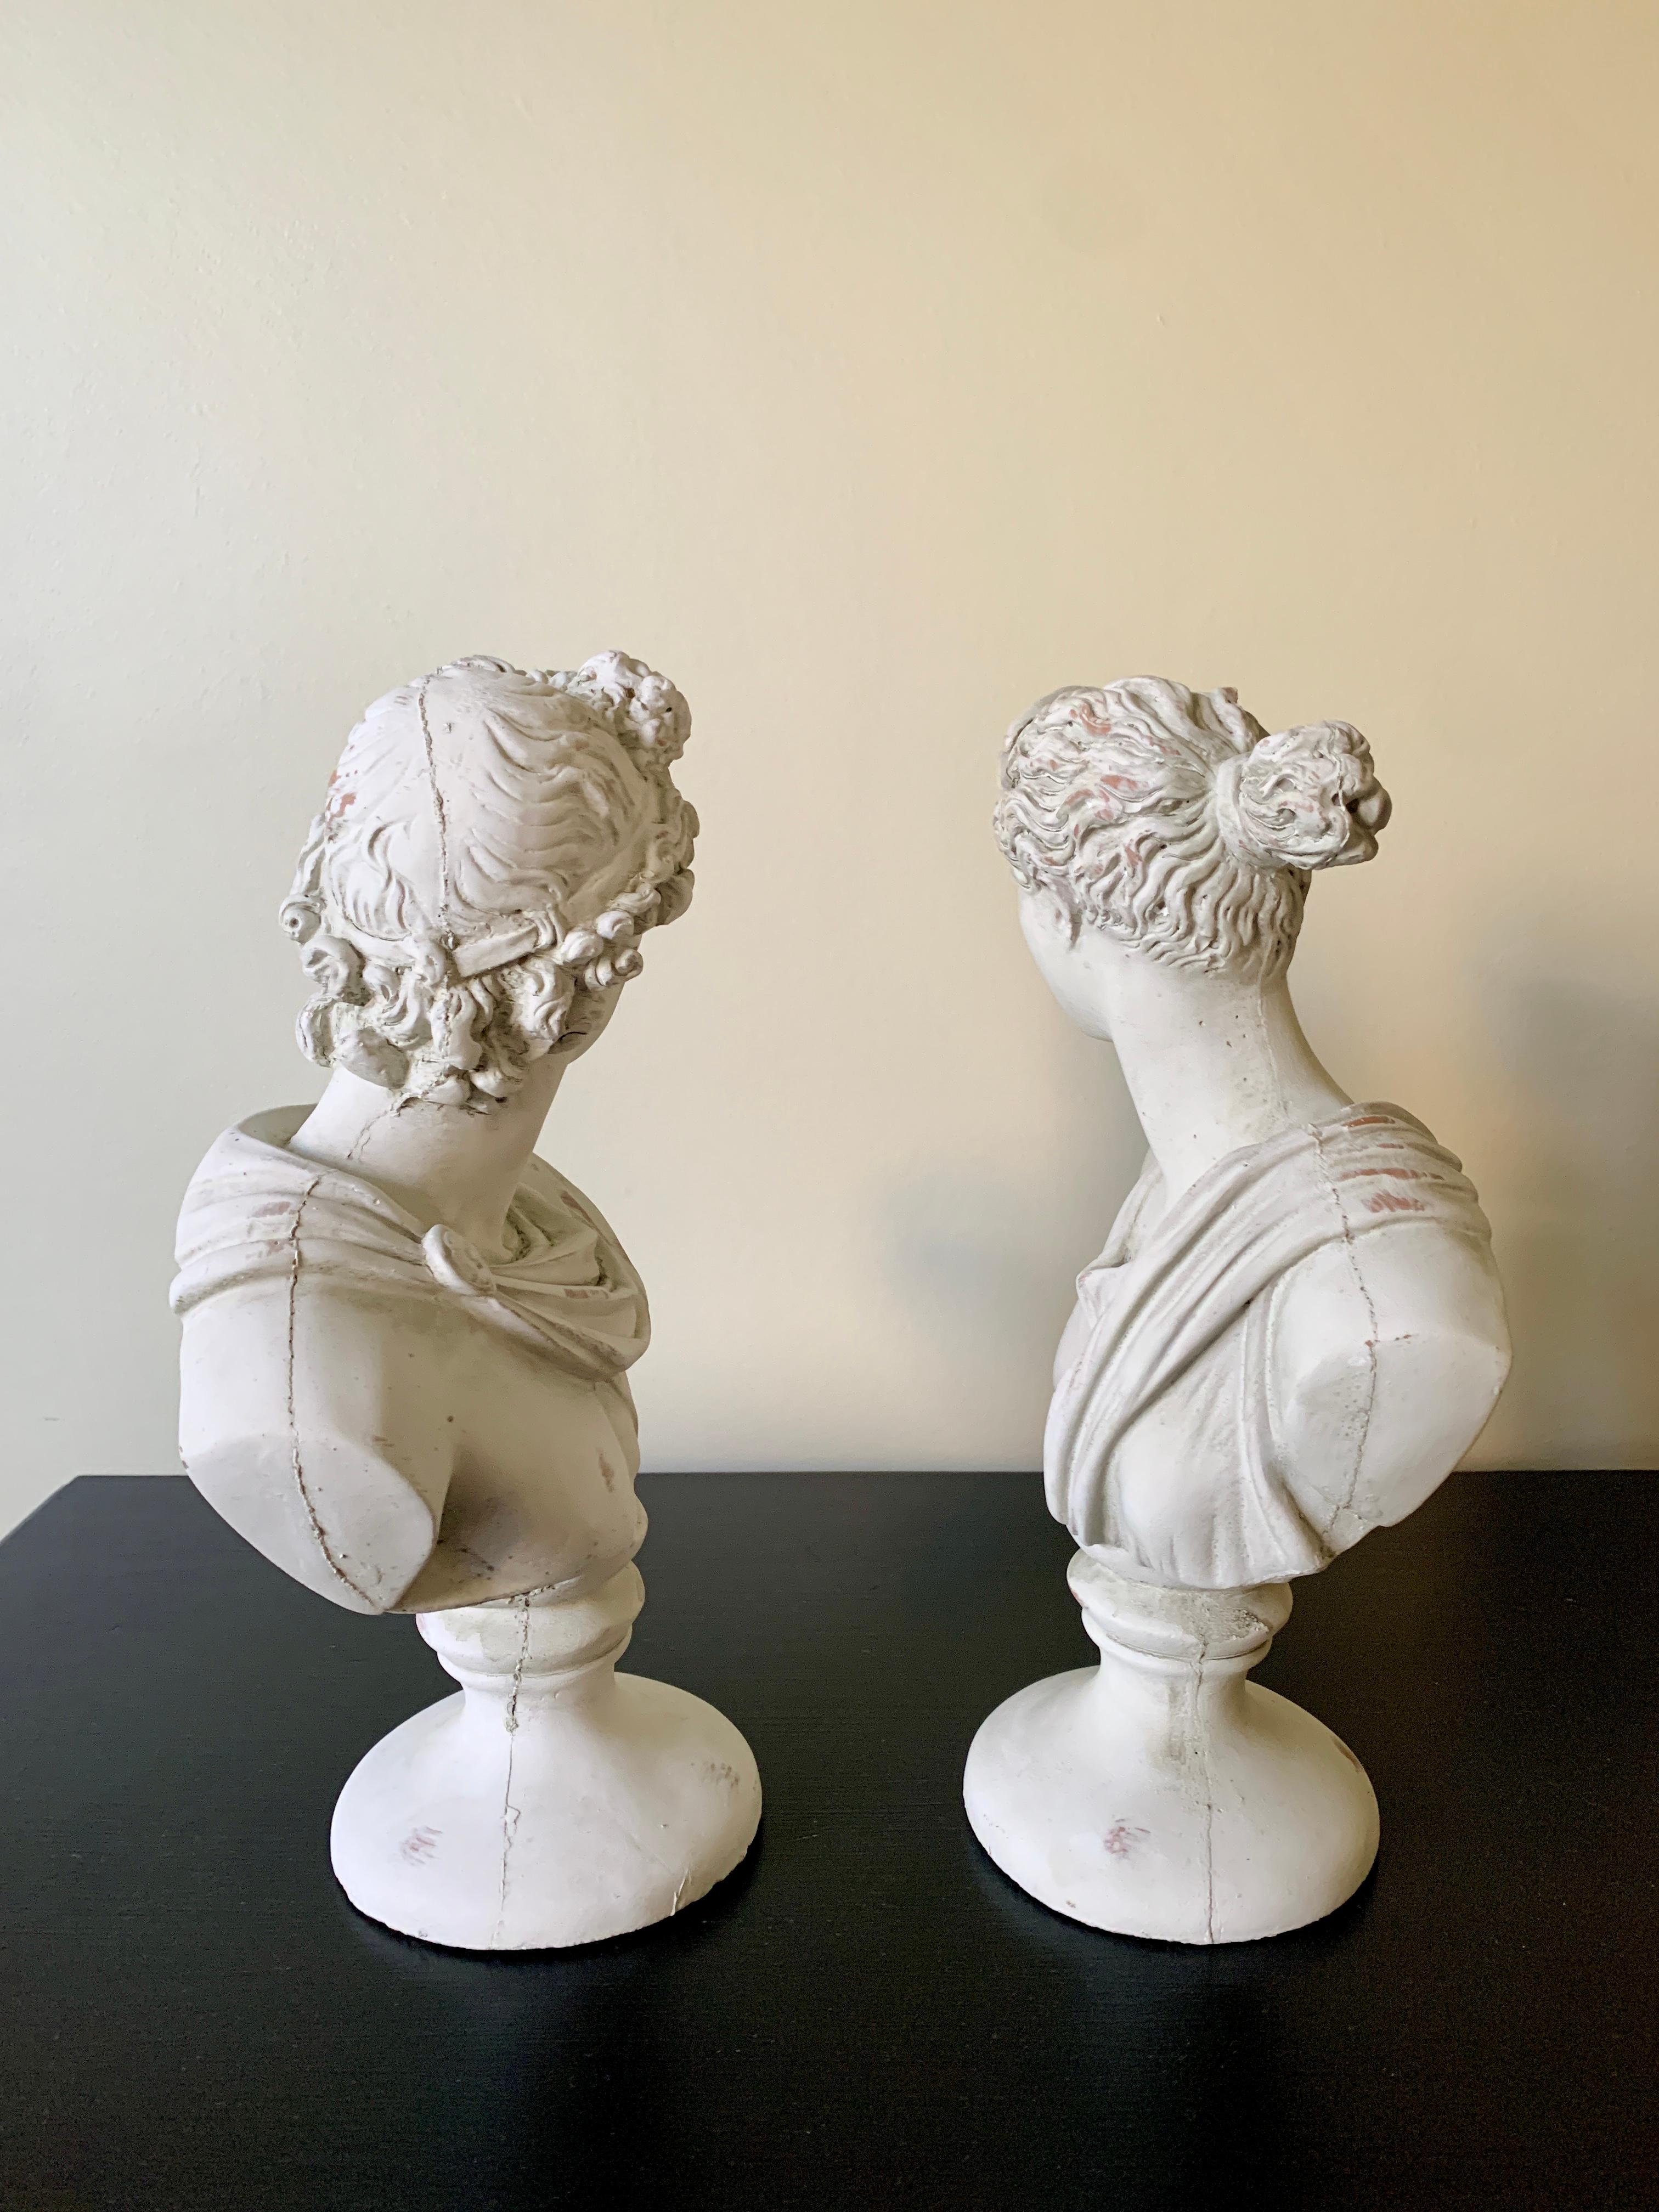 Neoclassical Plaster Busts of Diana and Apollo Belvedere Sculptures, Pair For Sale 2